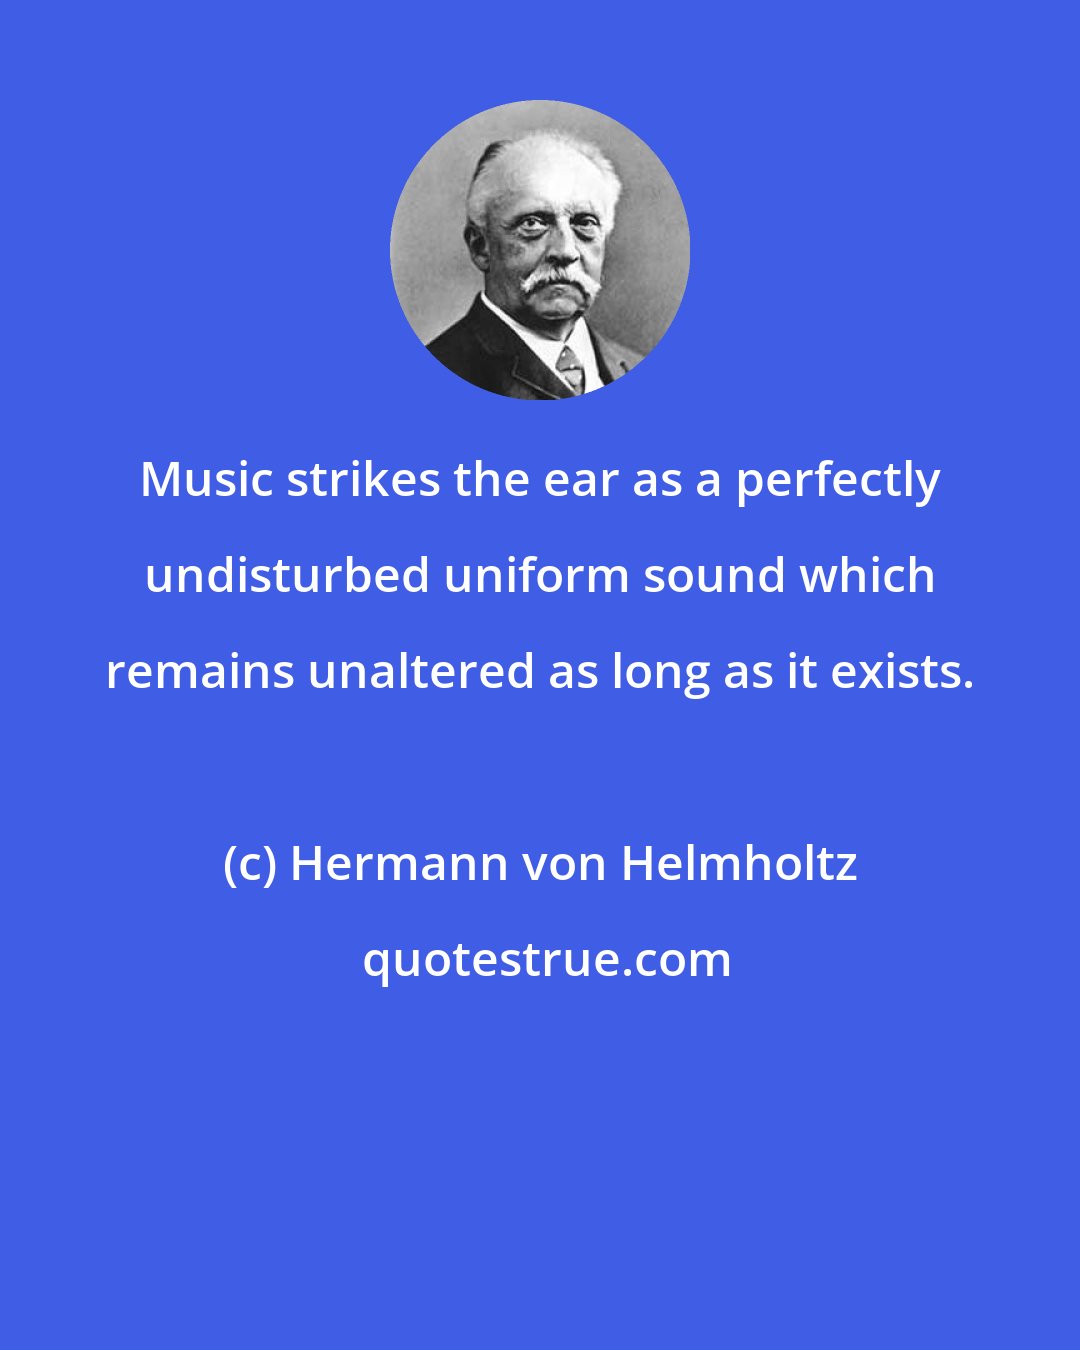 Hermann von Helmholtz: Music strikes the ear as a perfectly undisturbed uniform sound which remains unaltered as long as it exists.